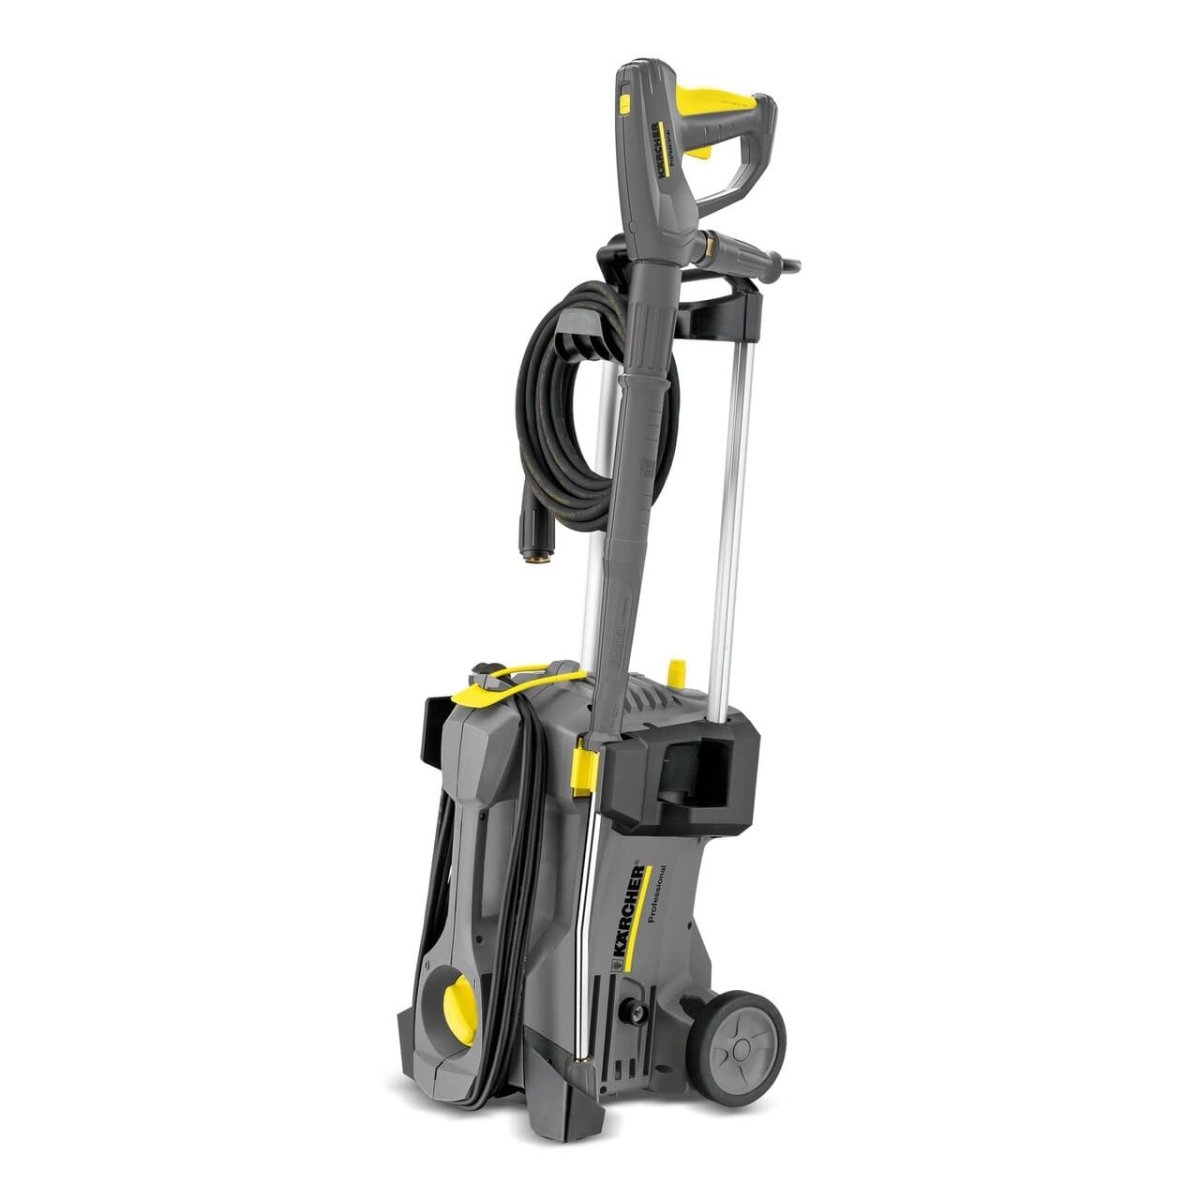 Commercial Cold Water Pressure Washer Pro HD 400 - Karcher